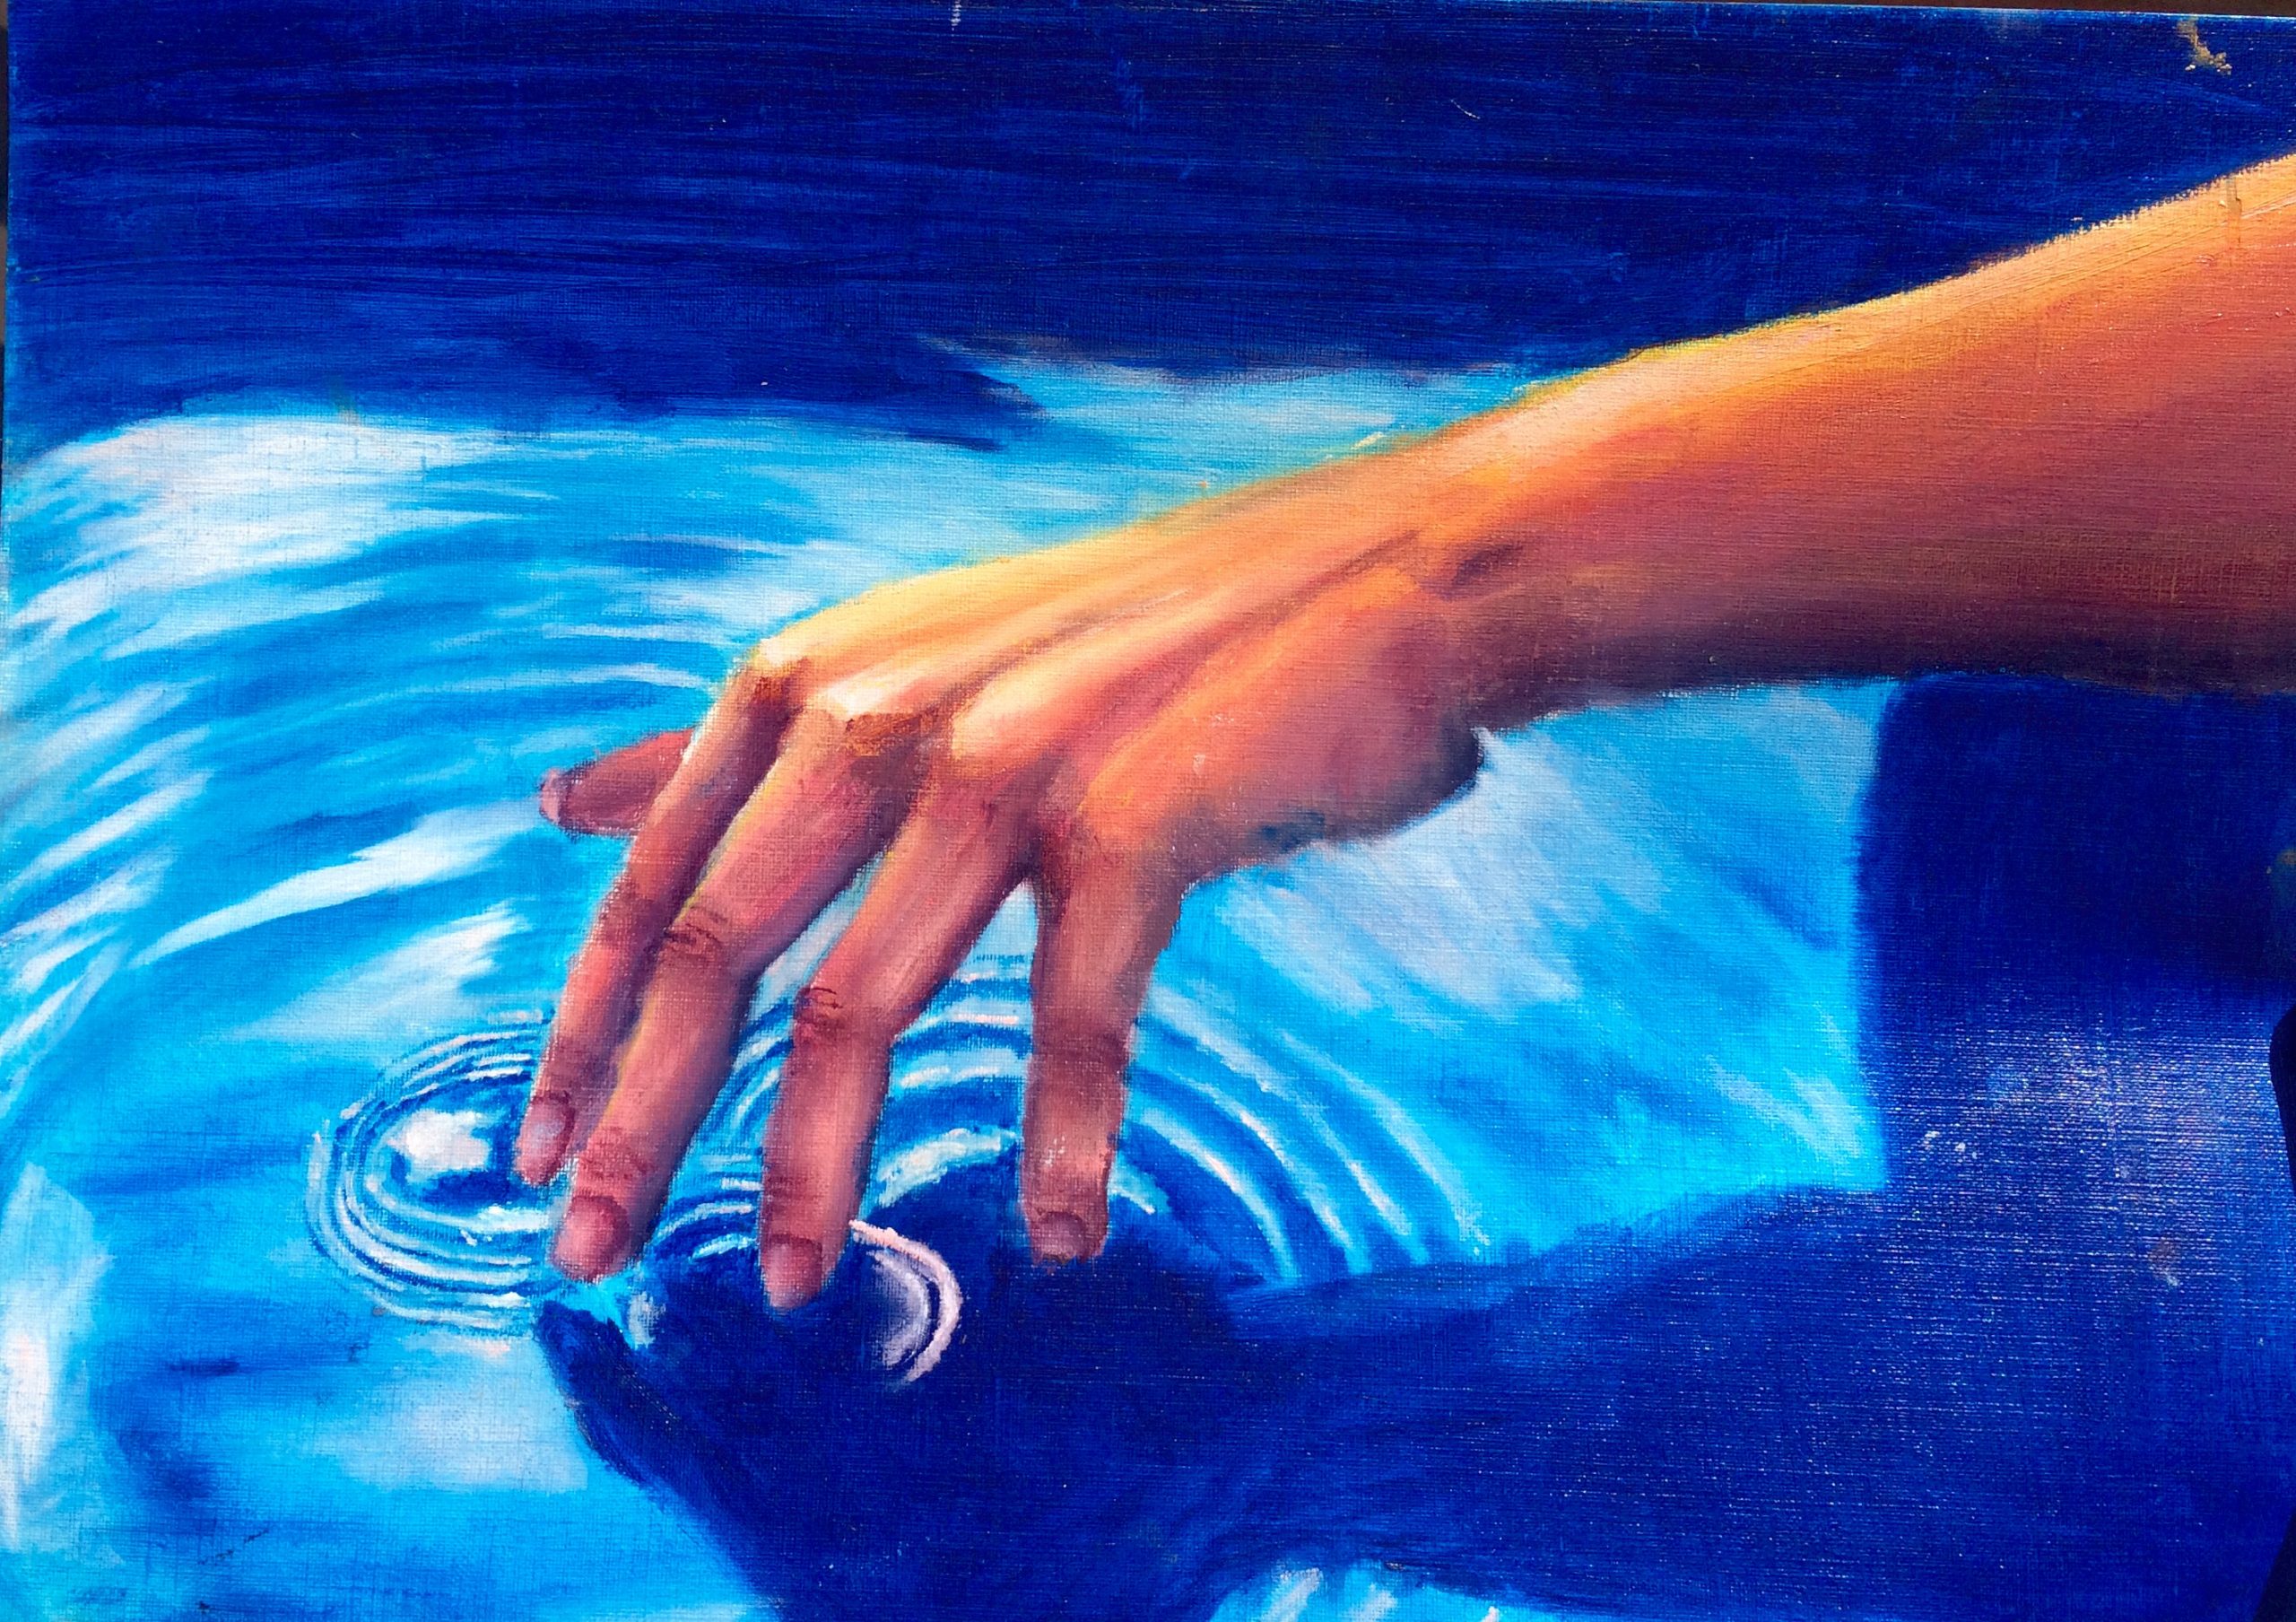 Oil painting of hand touching a pool of water